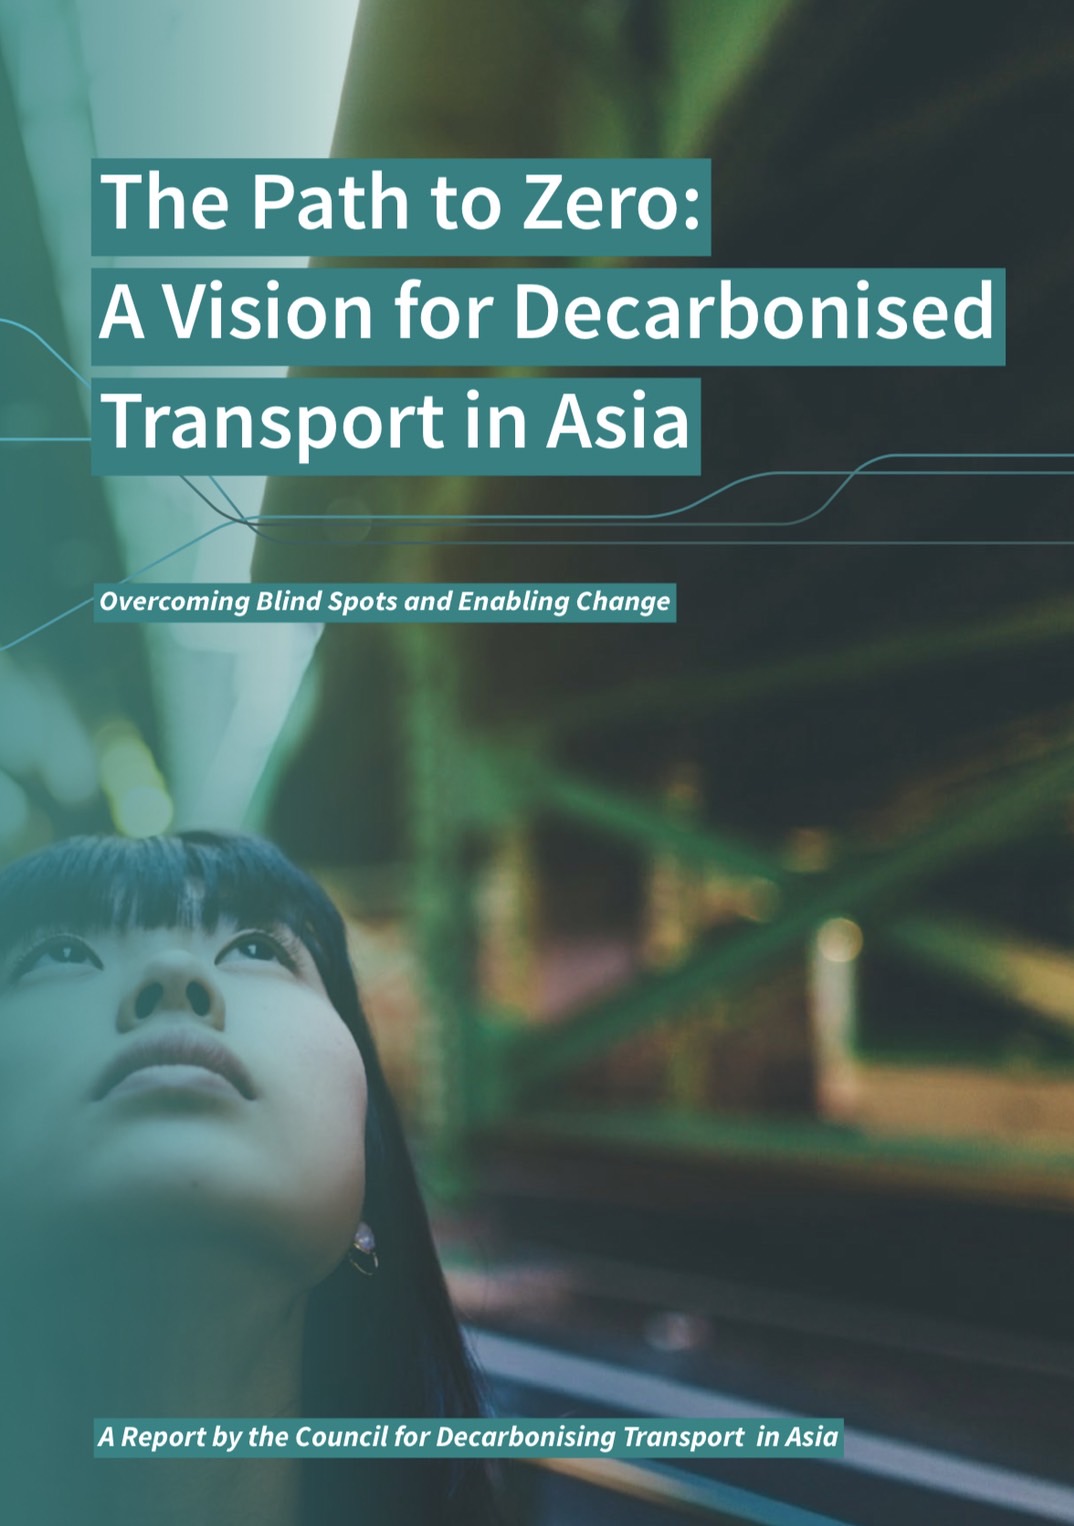 “The Path To Zero: A Vision For Decarbinised Transport in Asia”  A Report by the Council for Decarbonising Transport in Asia